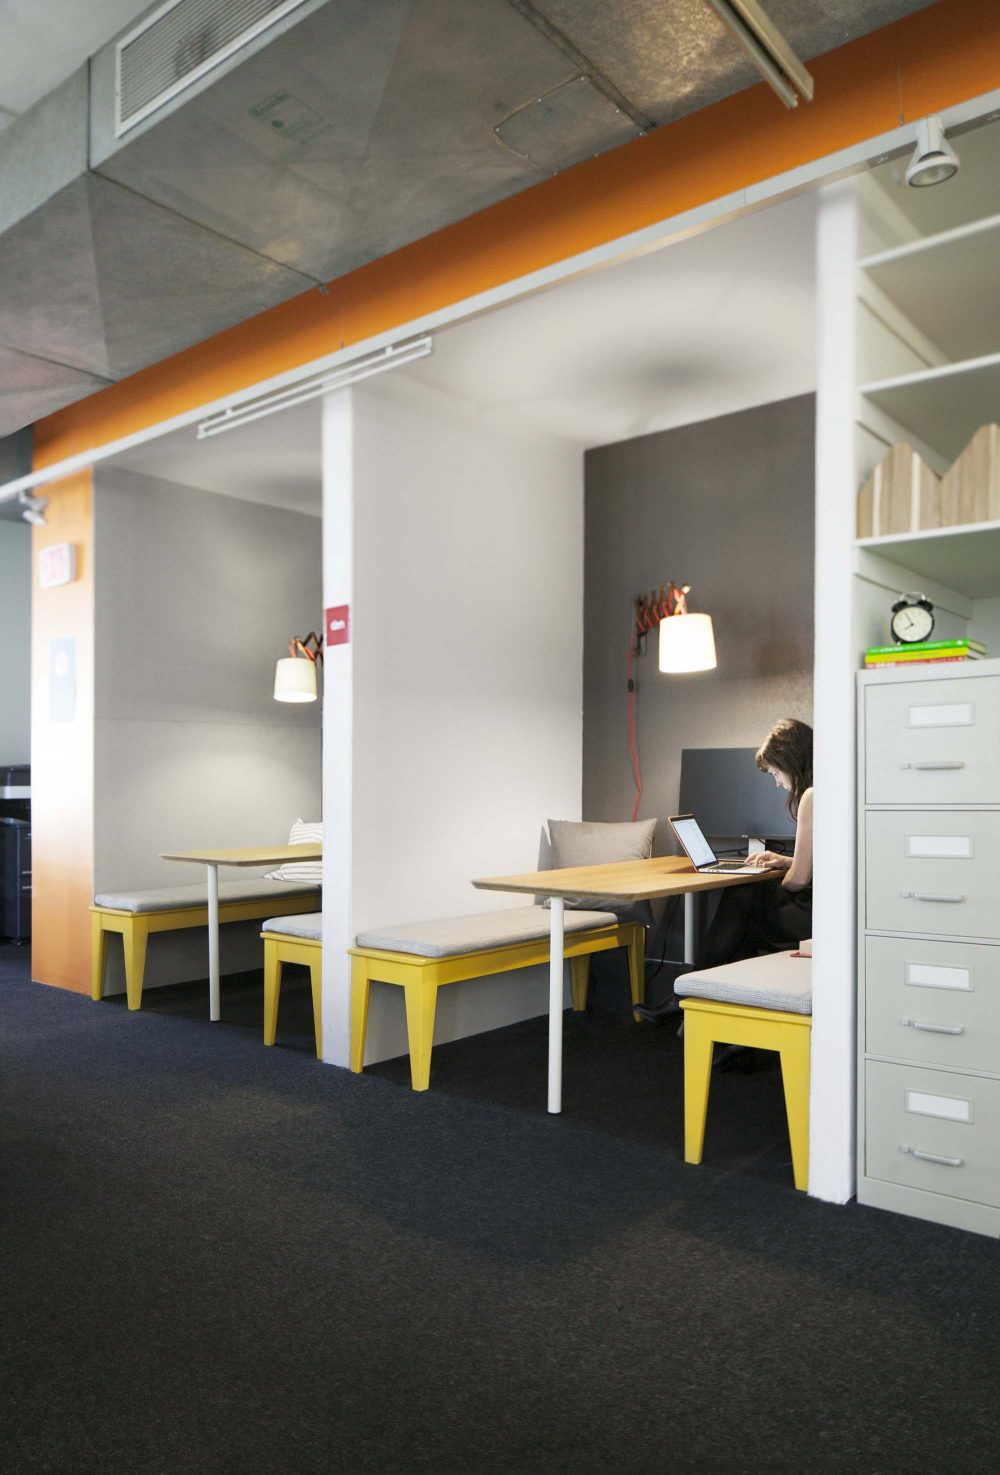 Secluded booth-like spaces called Dens allow for a more intimate, private working environment for those that need to concentrate on specific tasks